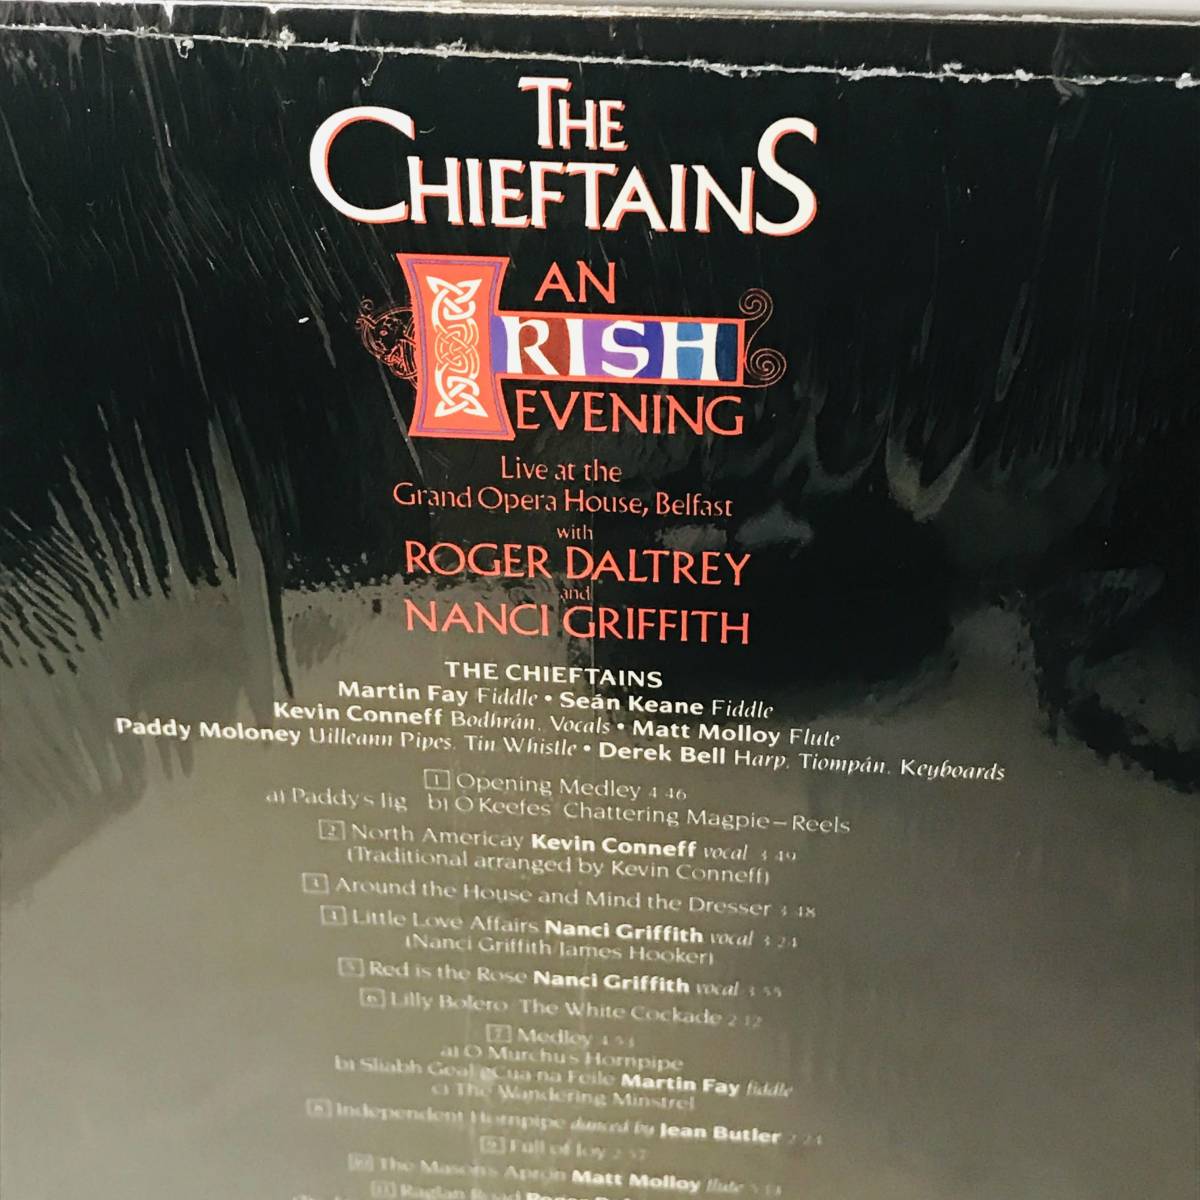 [LDl foreign record ] [The Chieftains An Irish Evening] The * chief tongue z( record surface / jacket : M /M ) rare US record NTSC